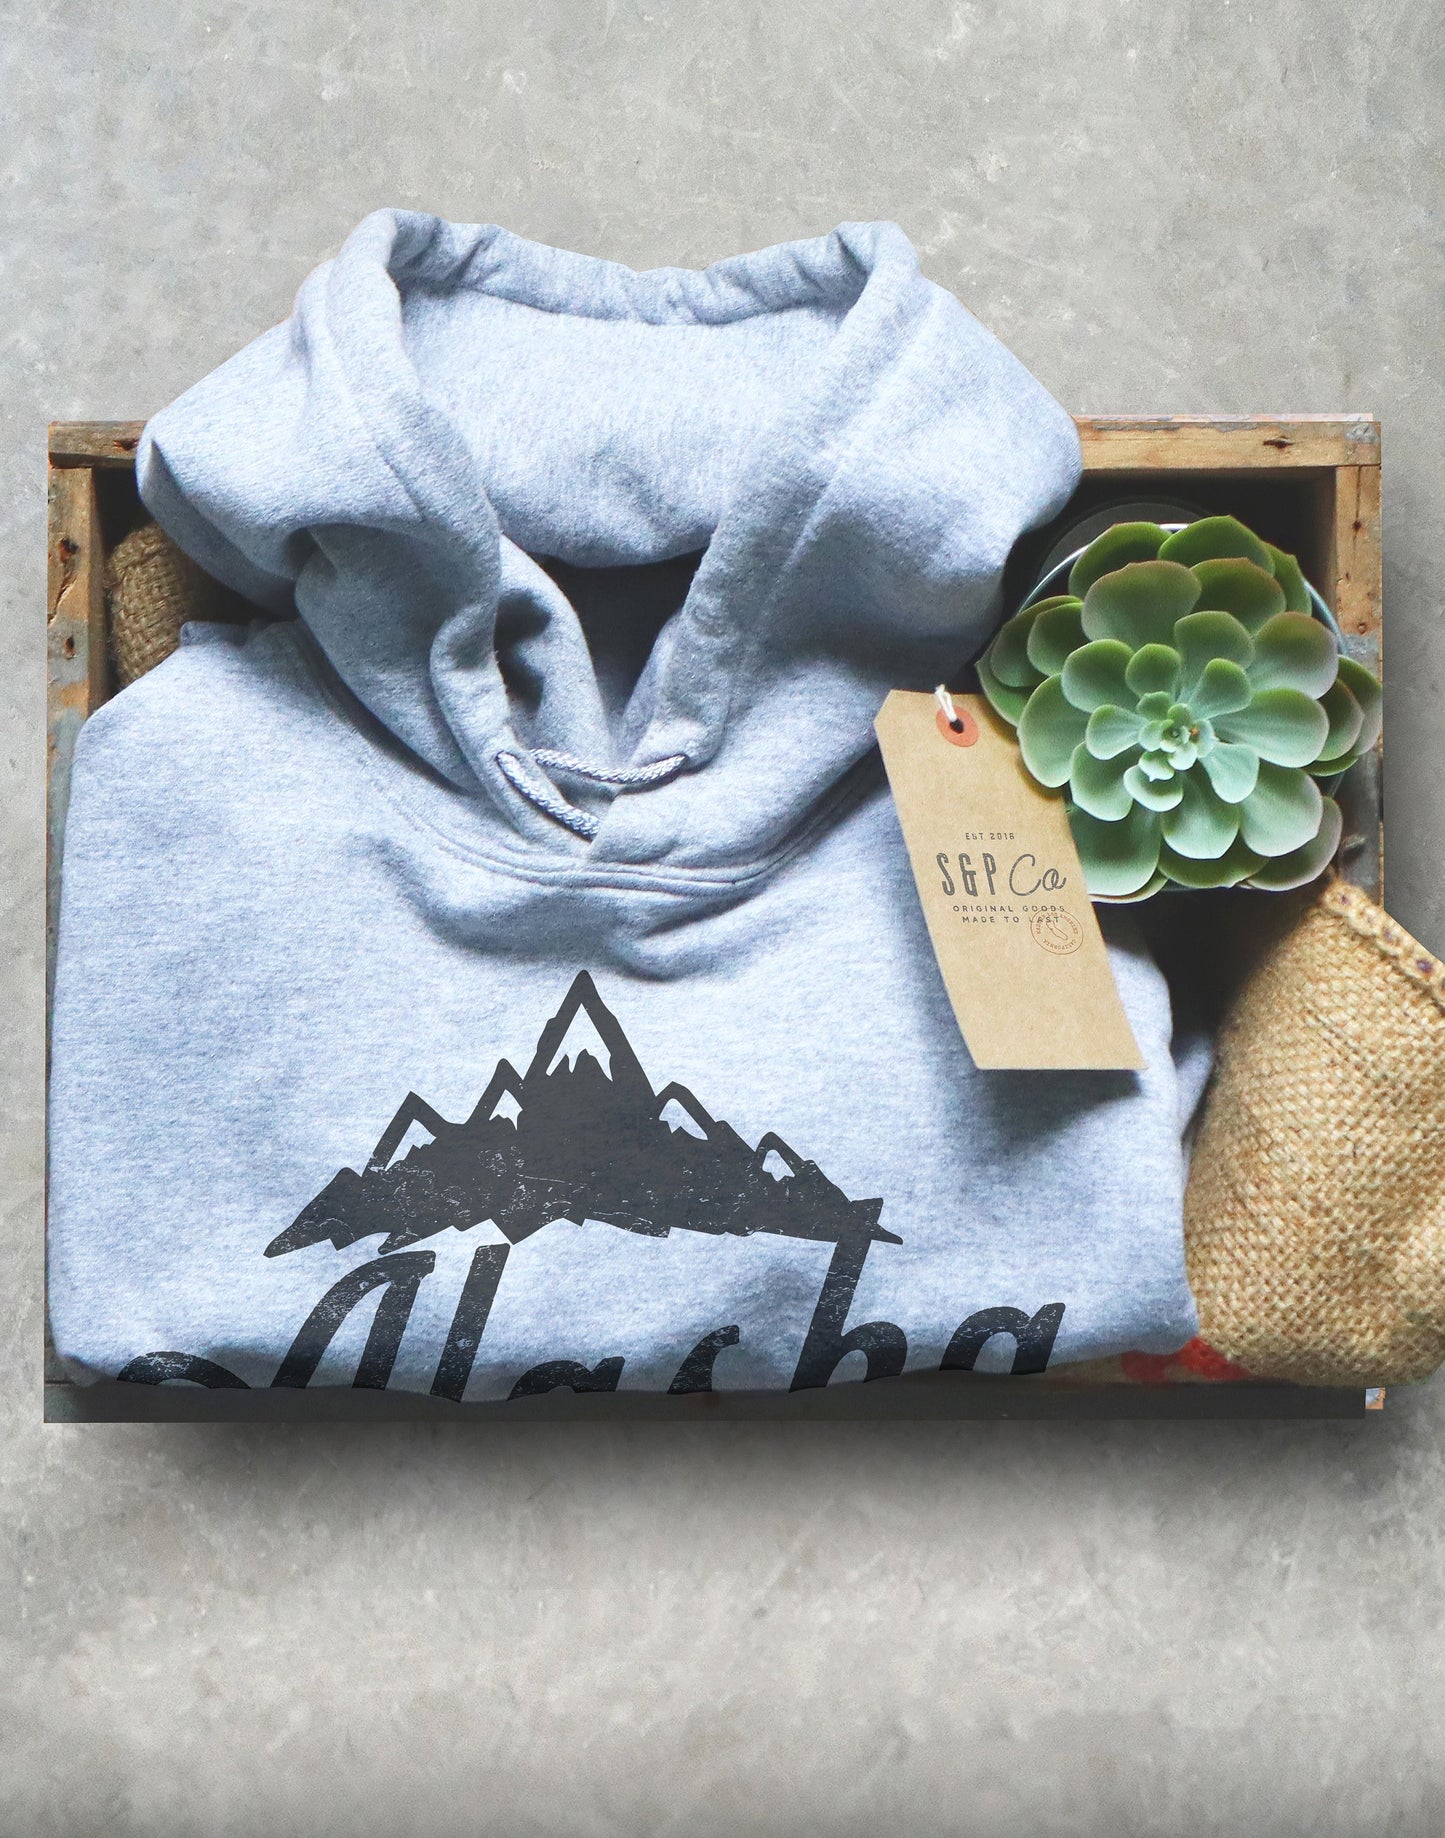 Alaska Is Calling And I Must Go Hoodie